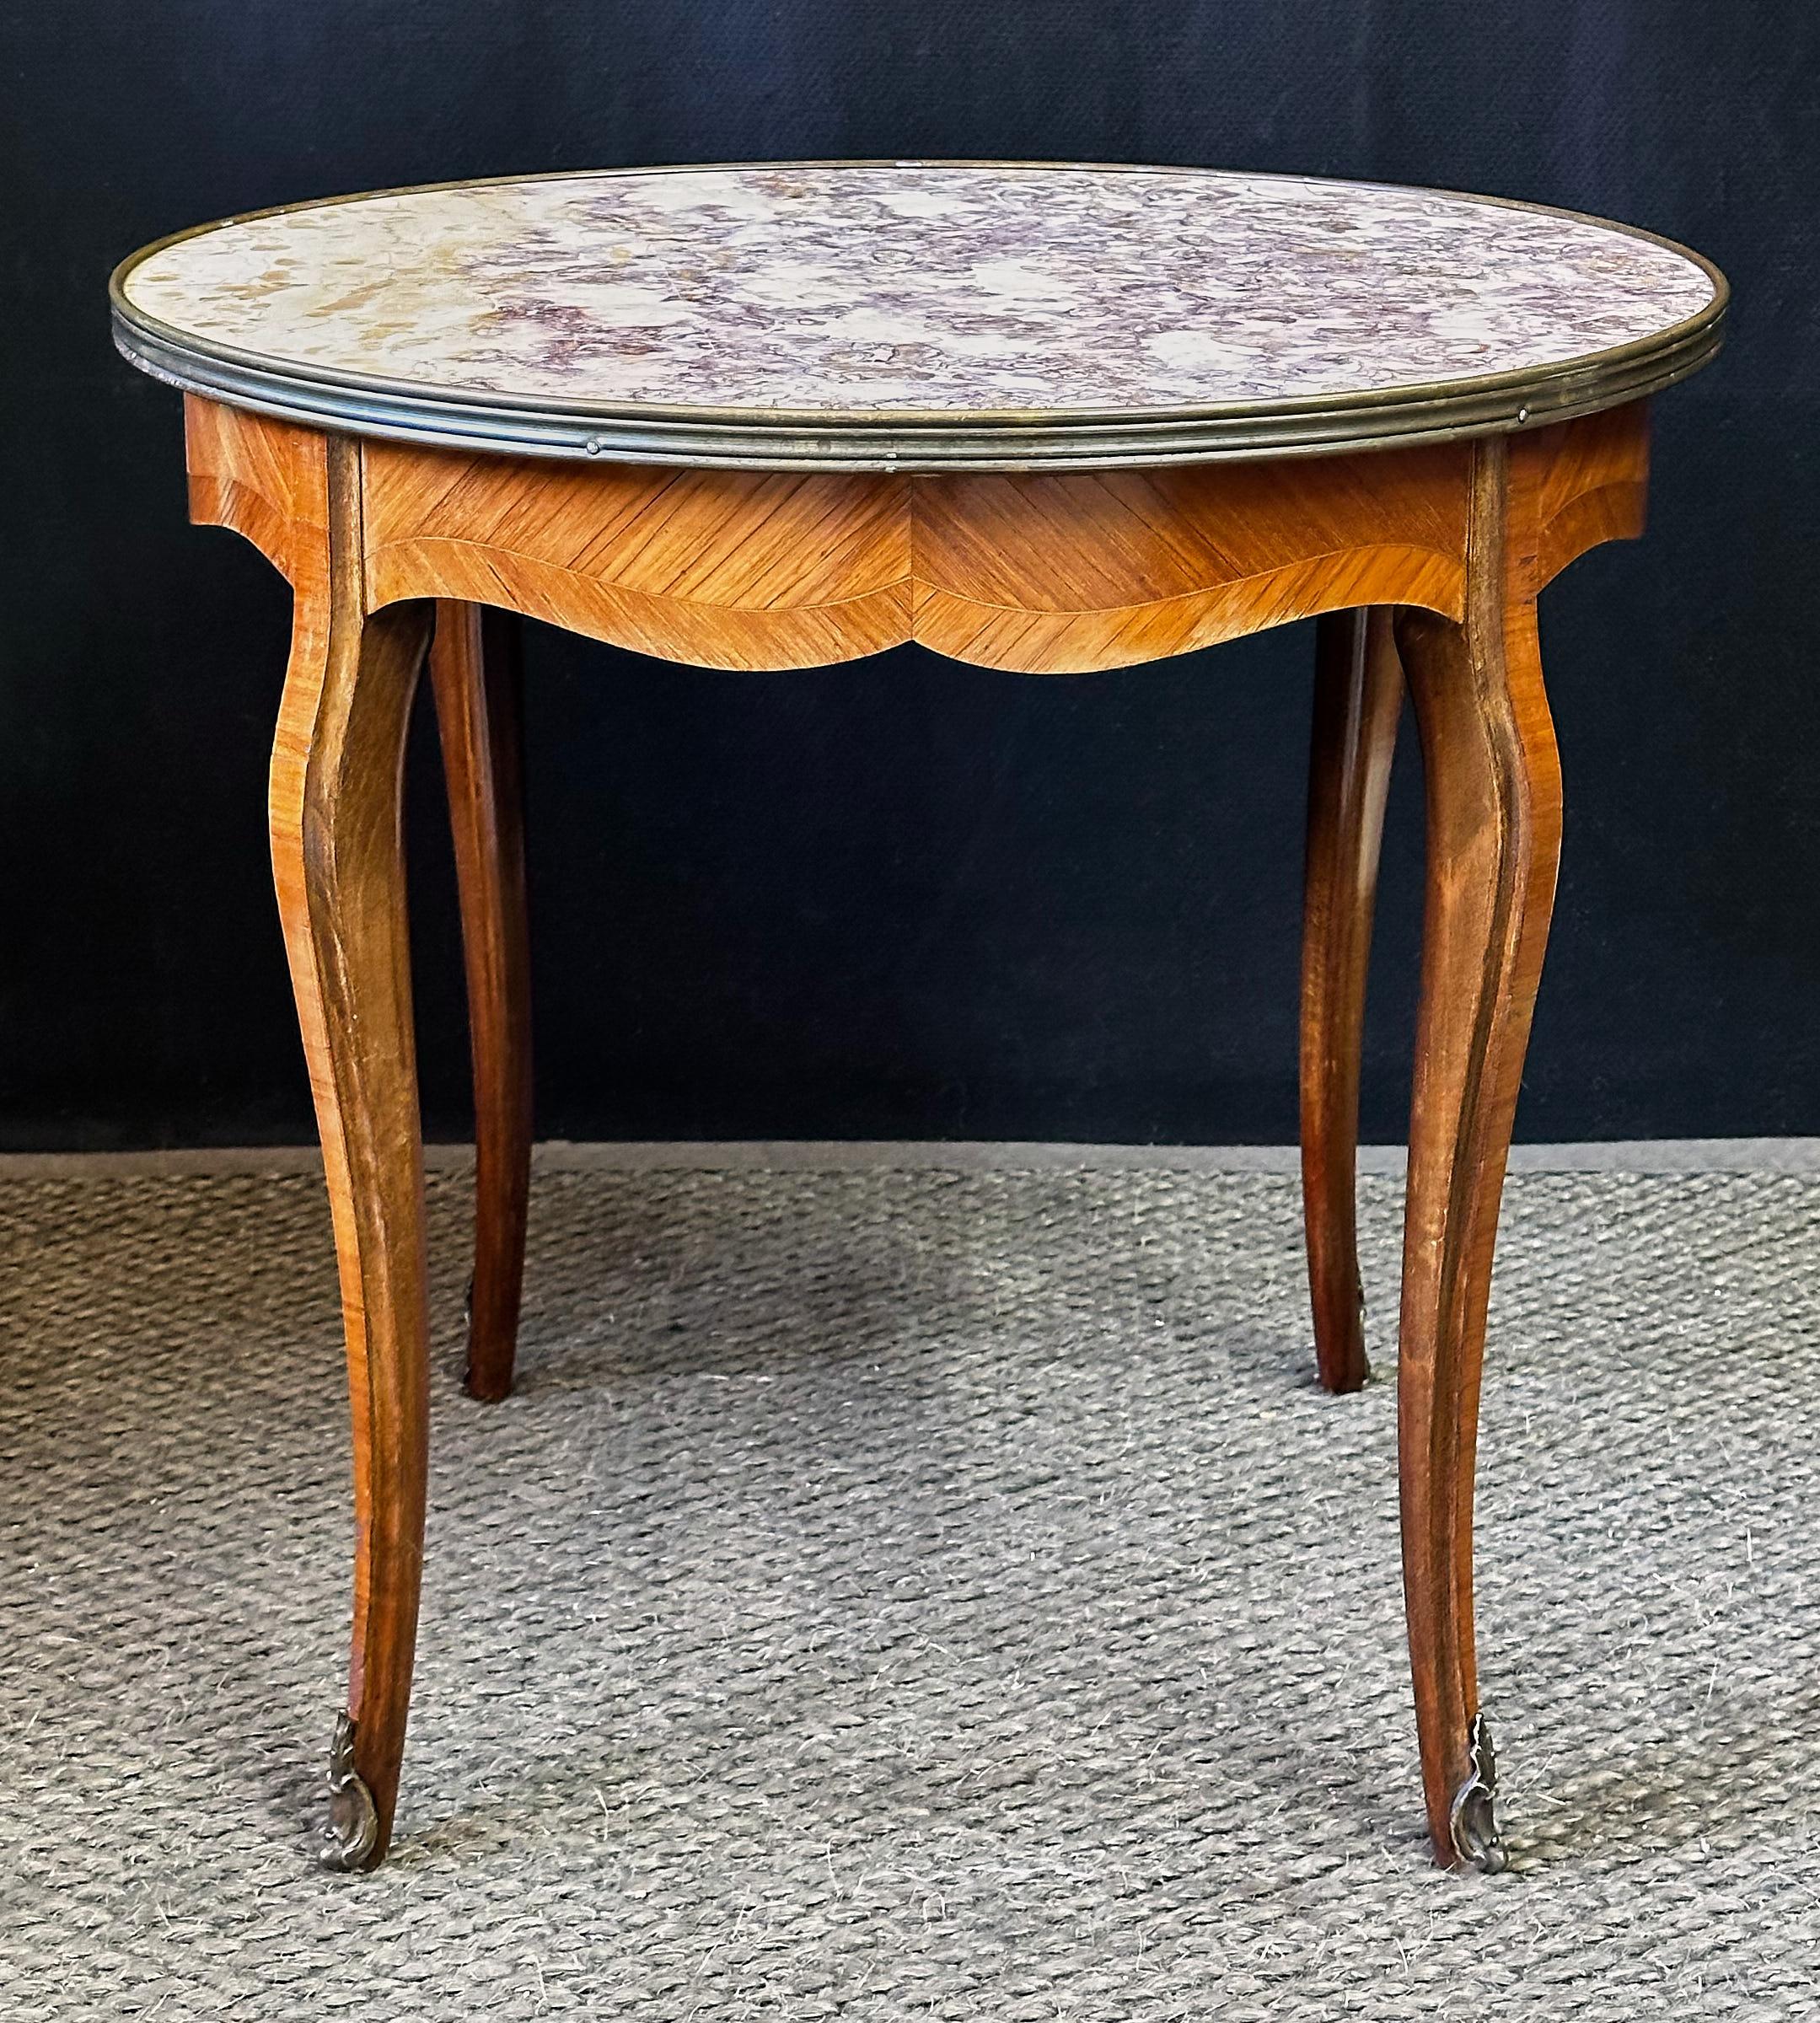 20th Century Italian side table with a beautiful round marble top having a molded outer edge of brass. The marble is in rare hues of violet, gold, and white and possibly from the Seravezza quarry of the Tuscan Alps. The top rests on a recessed apron